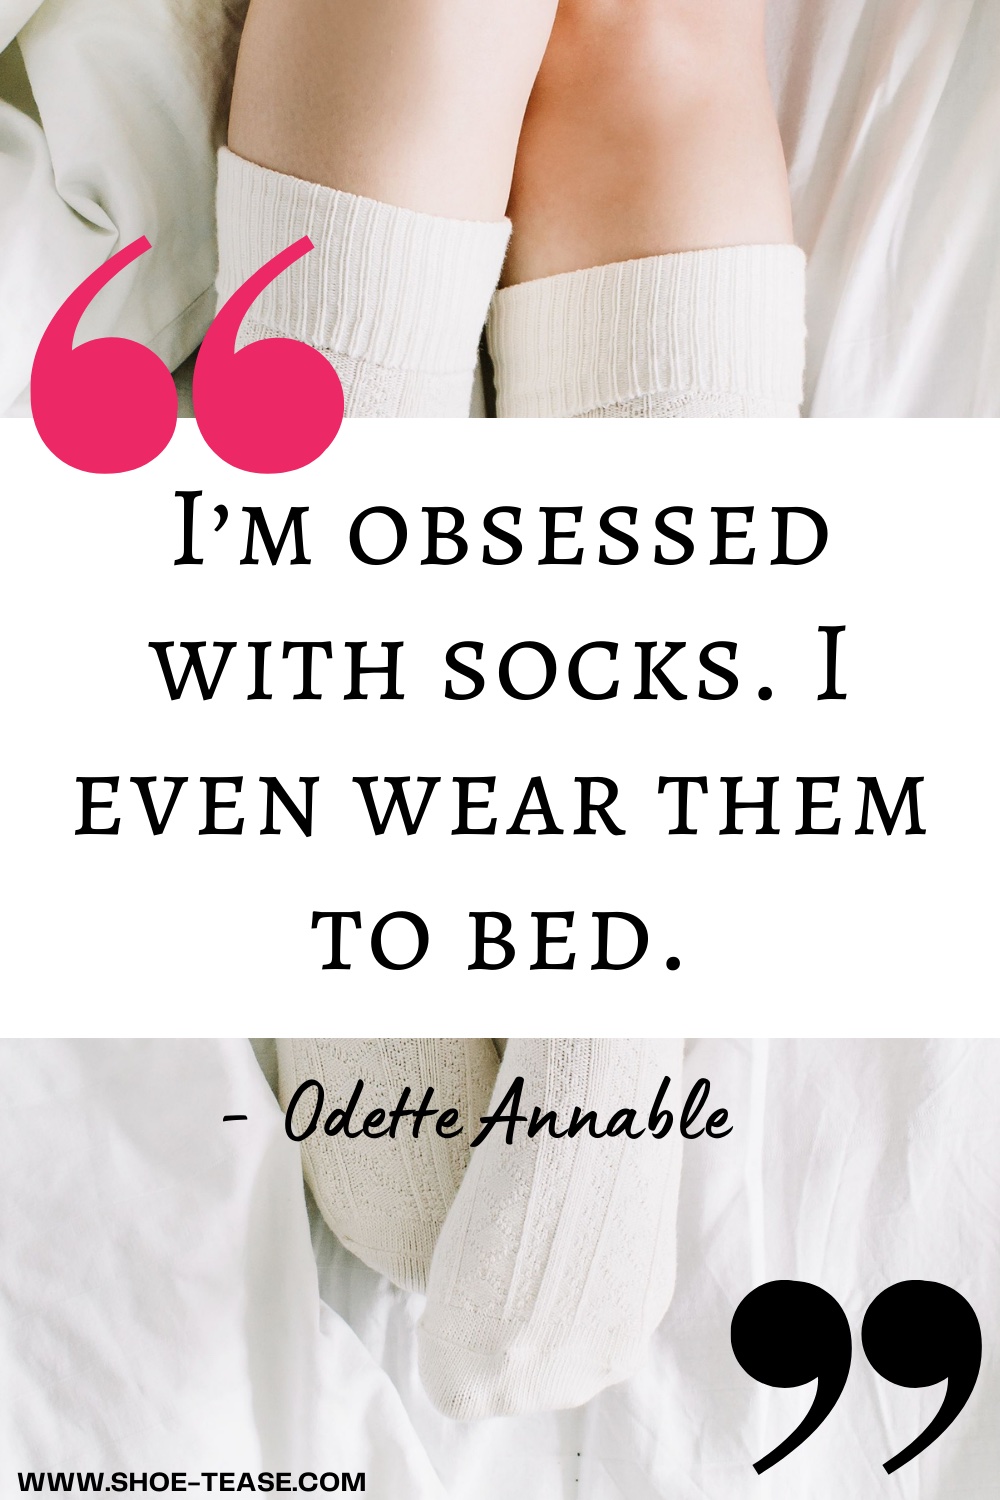 45+ Best Socks Quotes, Pantyhose Quotes and Captions for Instagram